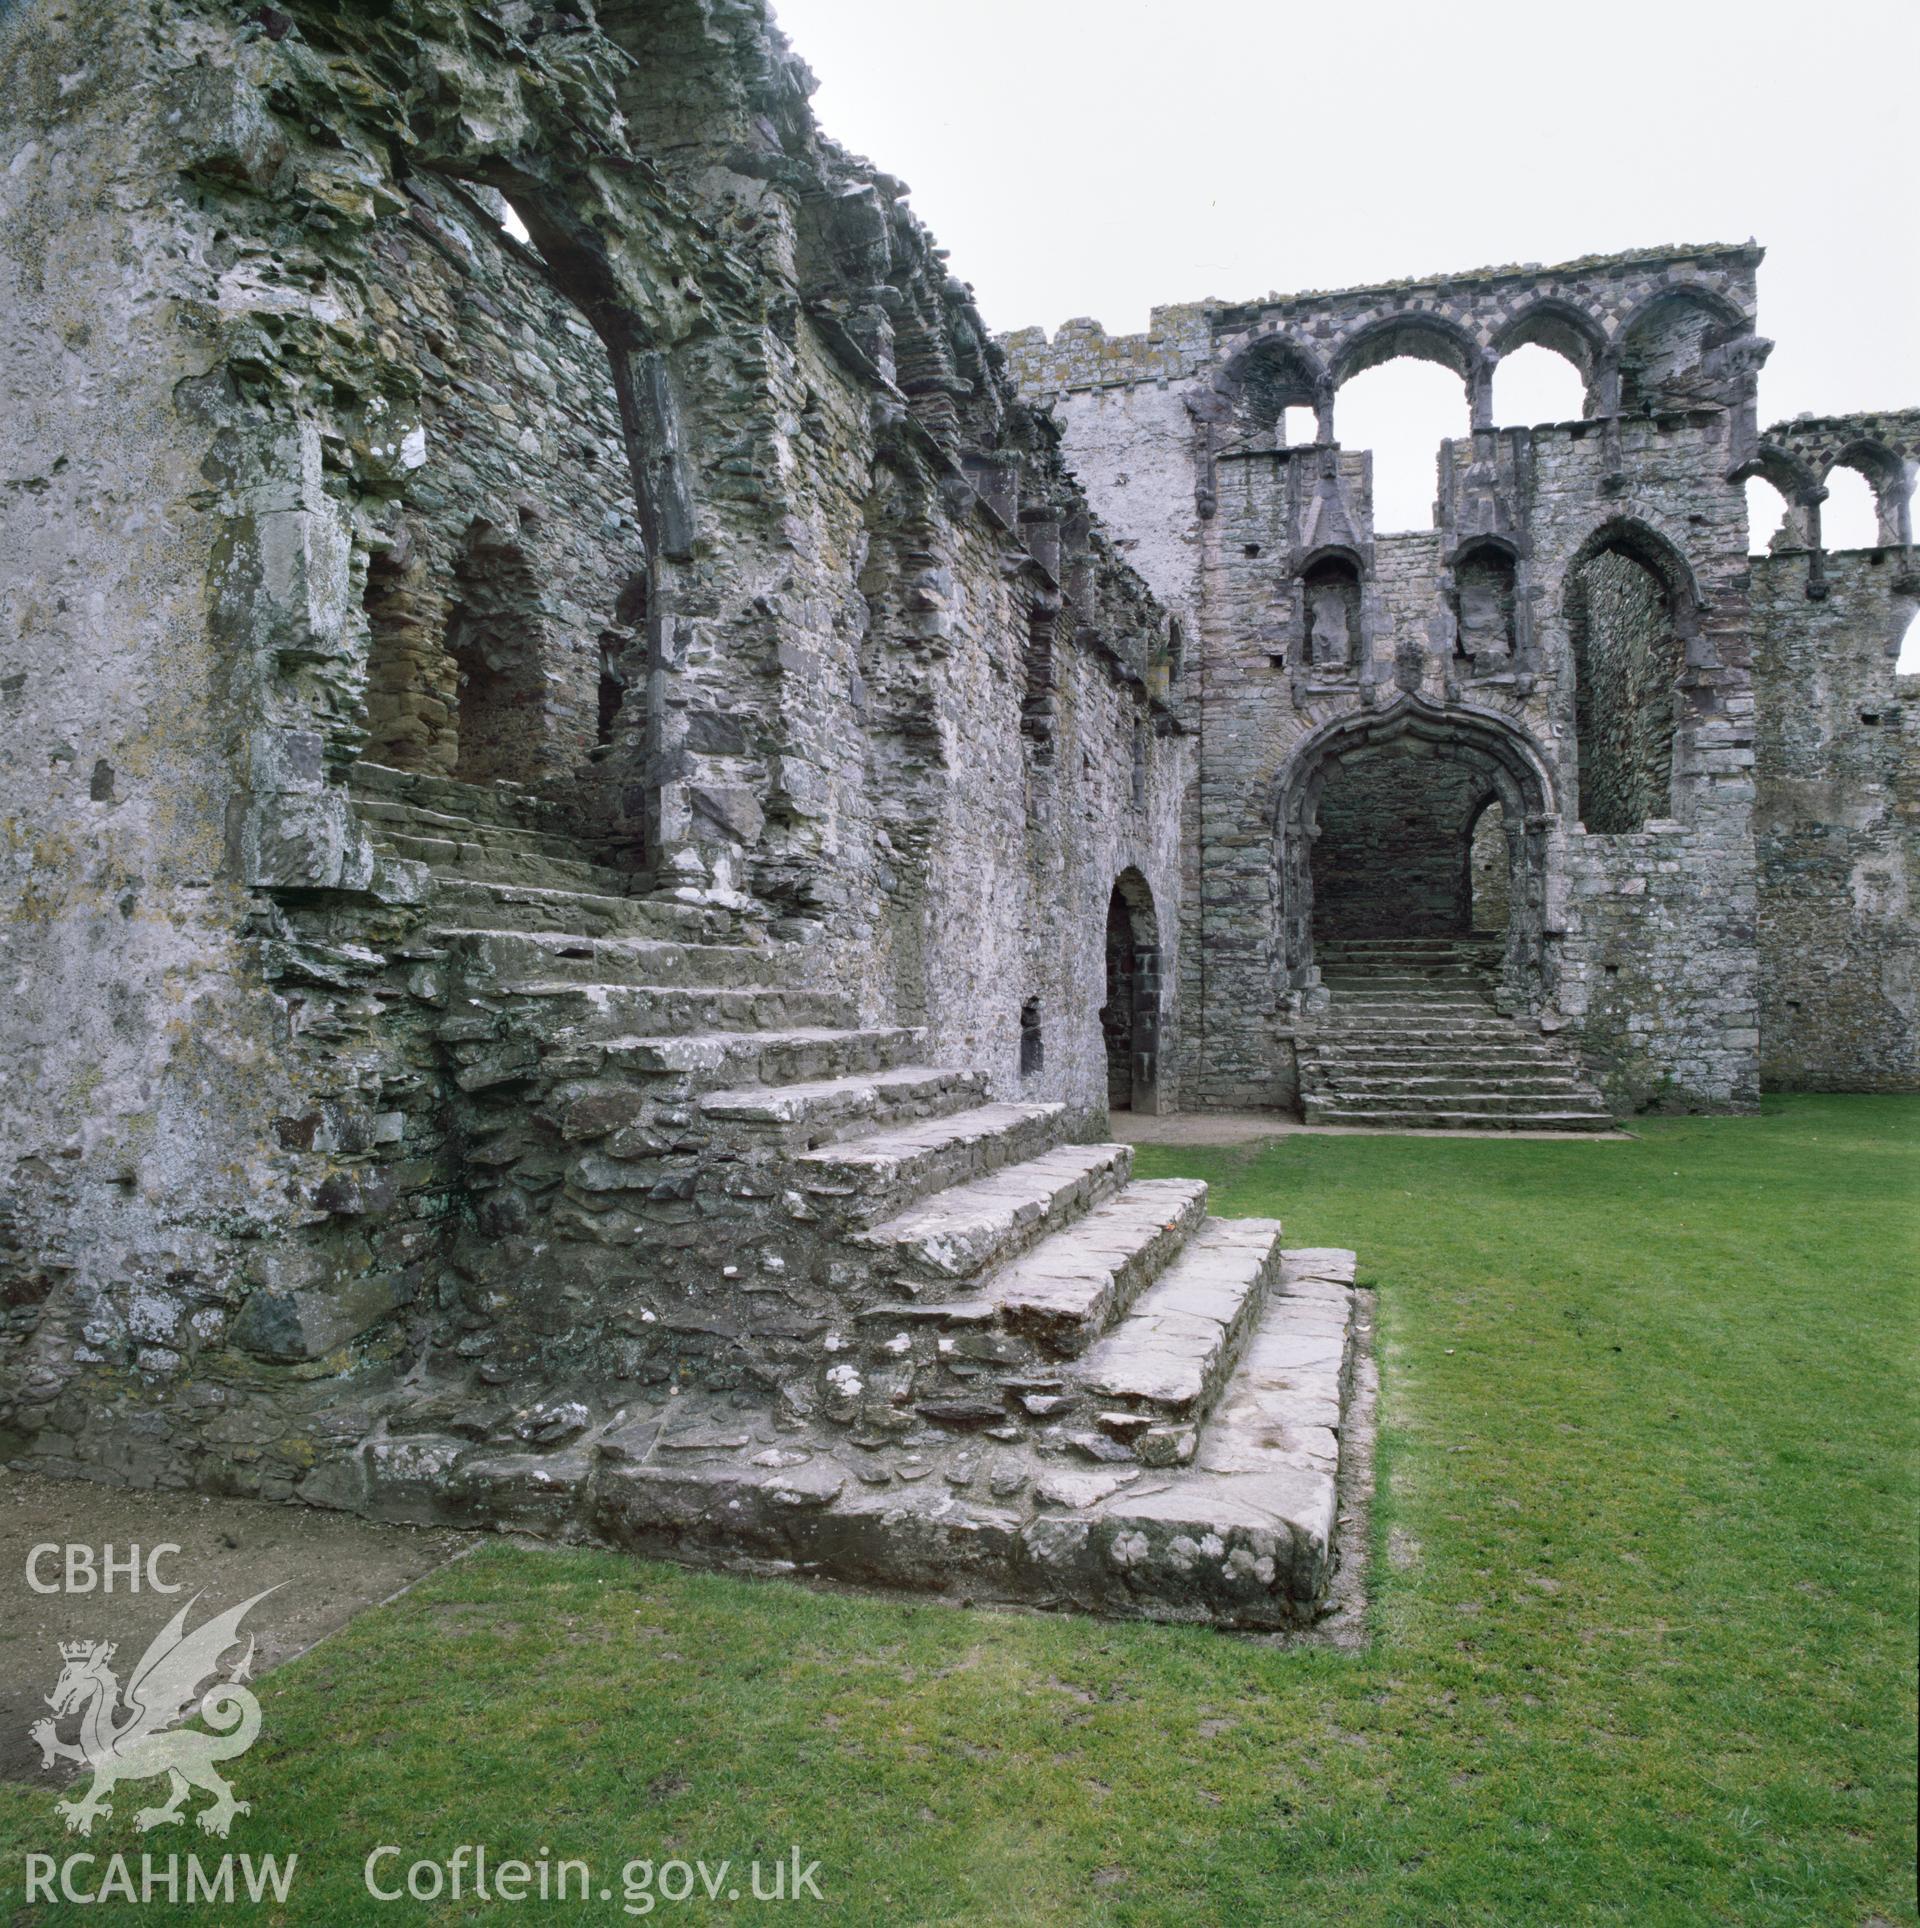 RCAHMW colour transparency showing  view of Bishops Palace, St Davids.